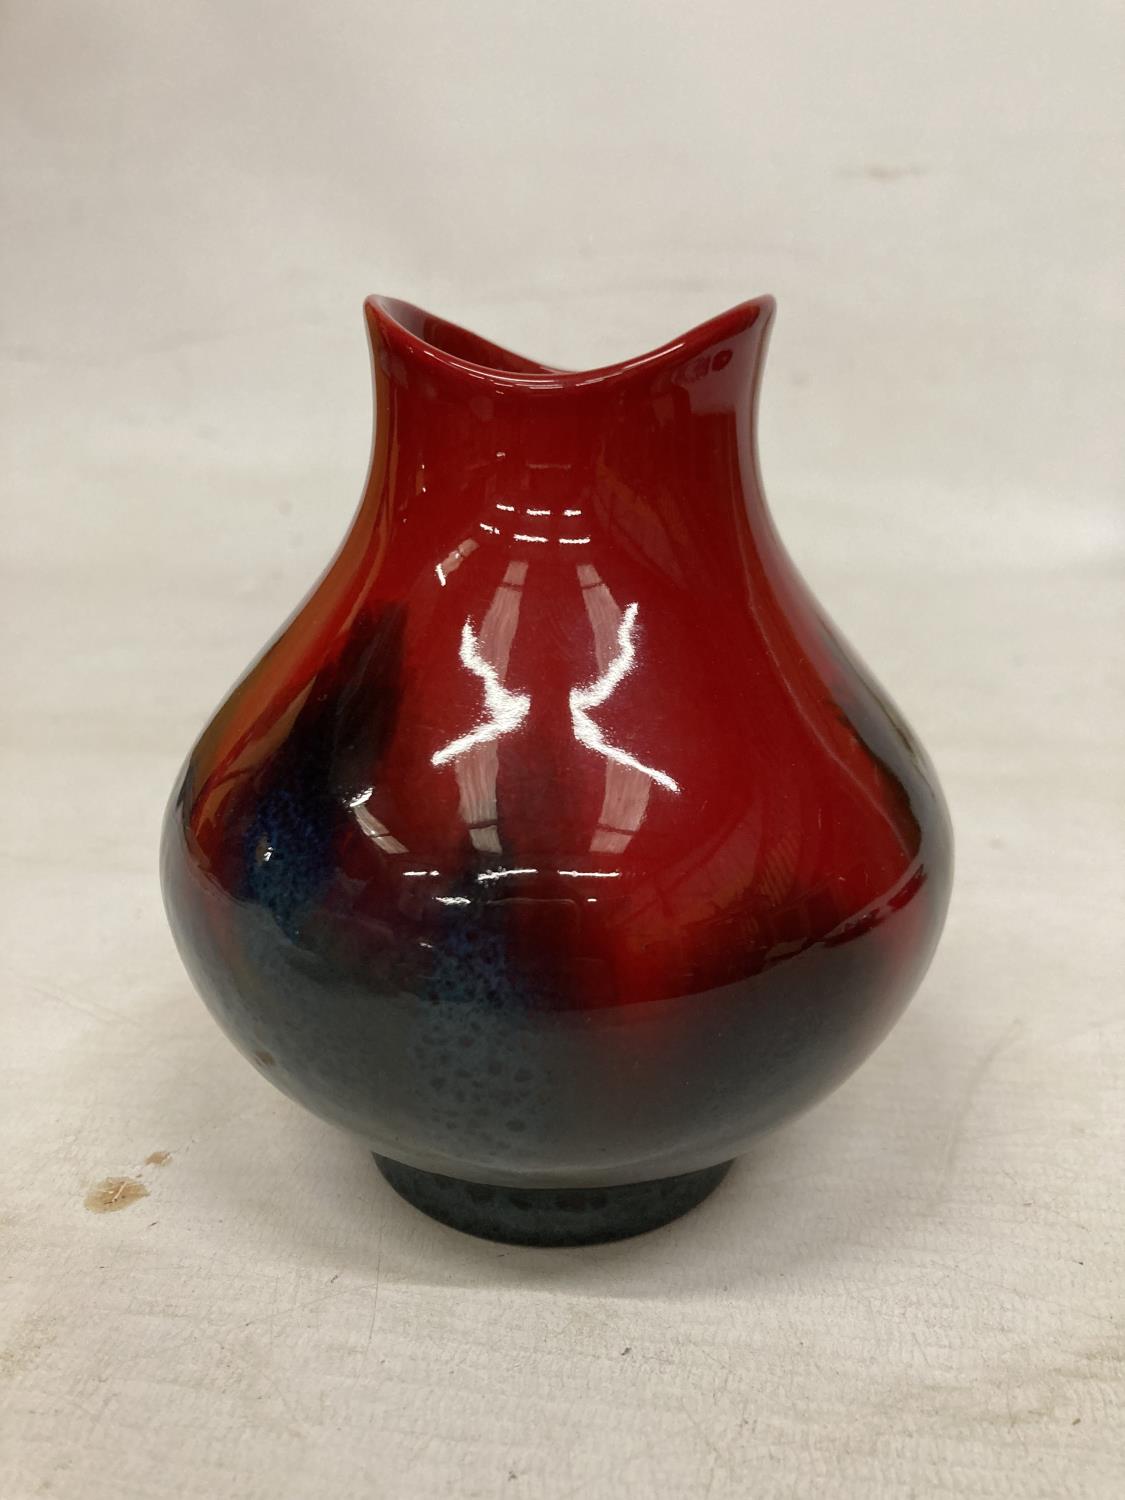 A ROYAL DOULTON FLAMBE VEINED VASE - Image 3 of 6